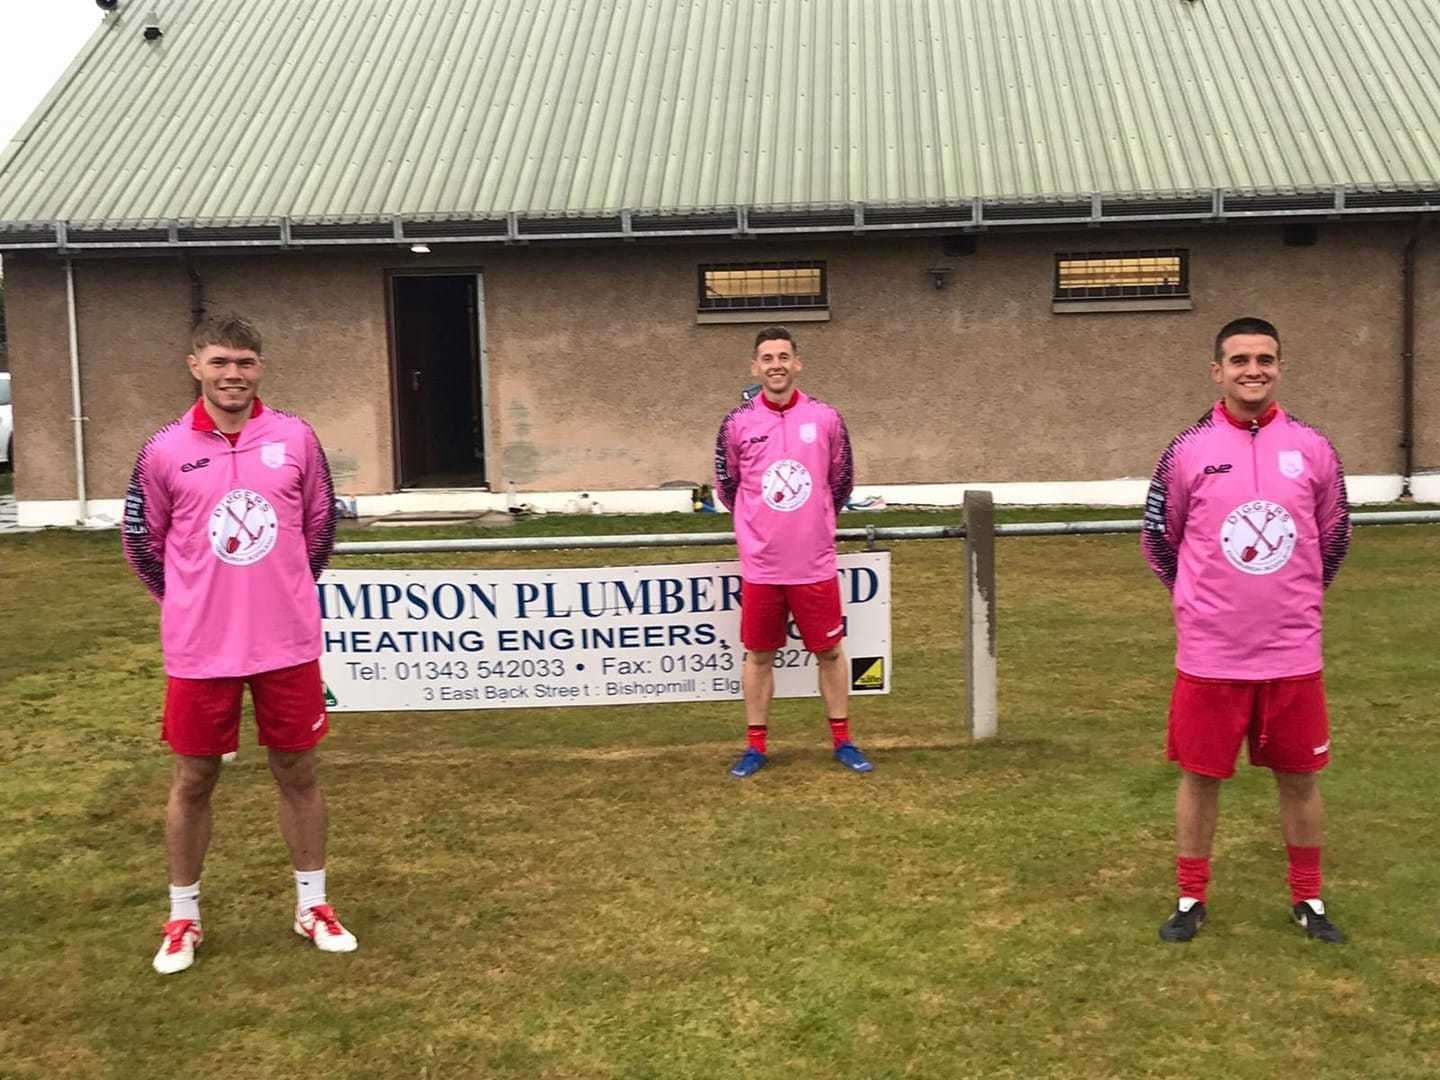 Forres Thistle players received new training kits from Mental Mechanics after their efforts in a recent hour-long run. Left to right: Ross Paterson, Neil Moir and Danny Black try on their new kits.